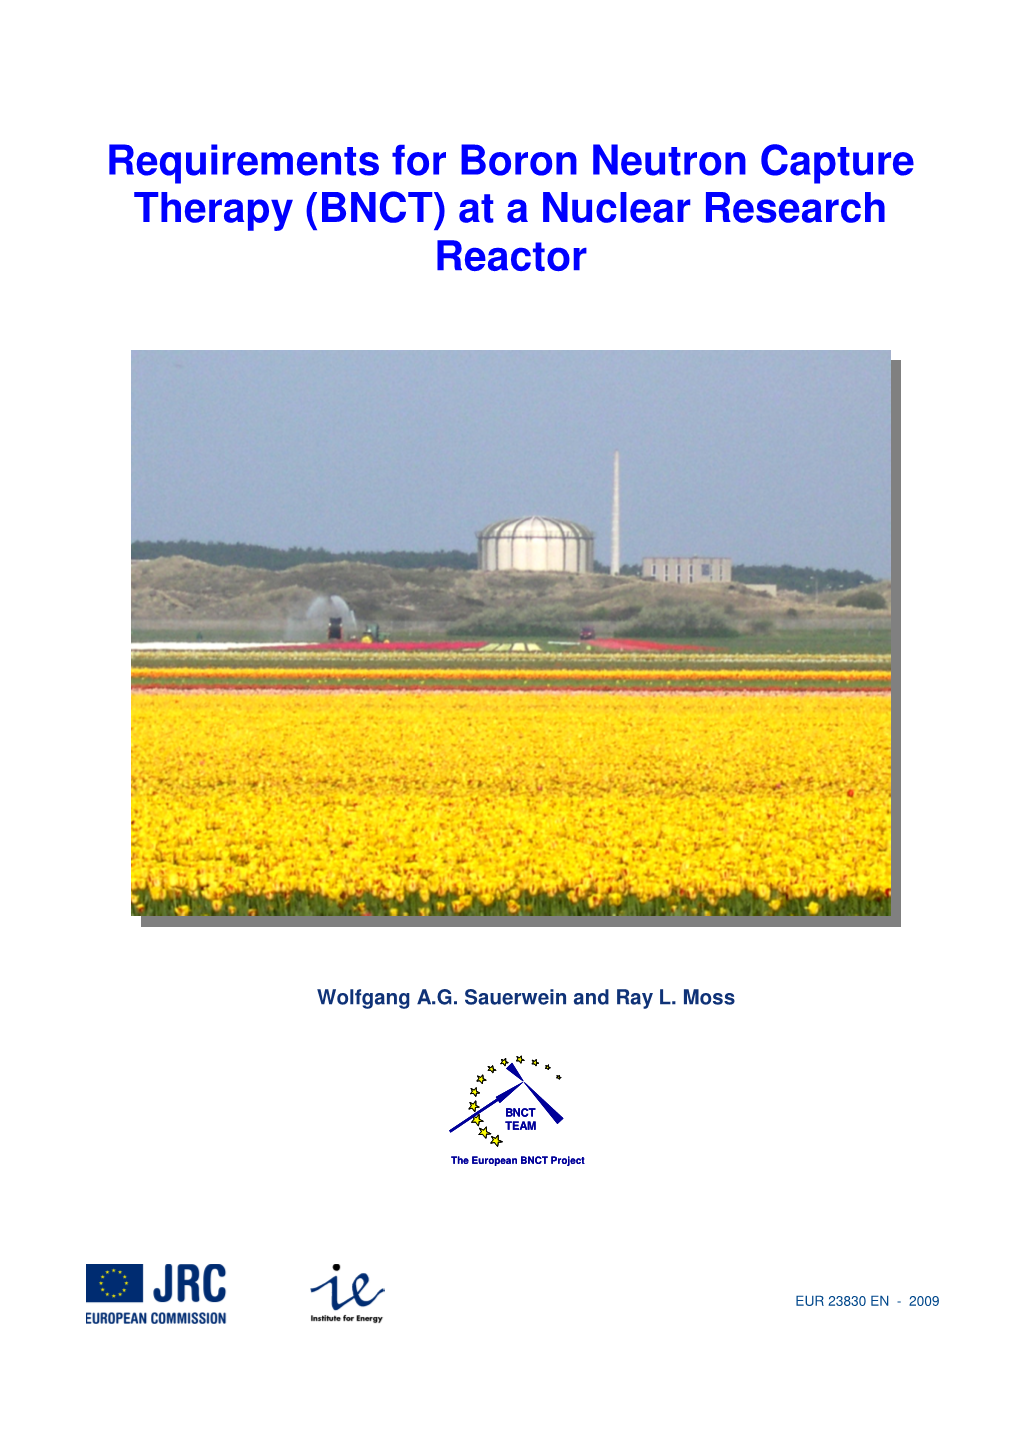 Requirements for Boron Neutron Capture Therapy (BNCT) at a Nuclear Research Reactor Editor(S): W